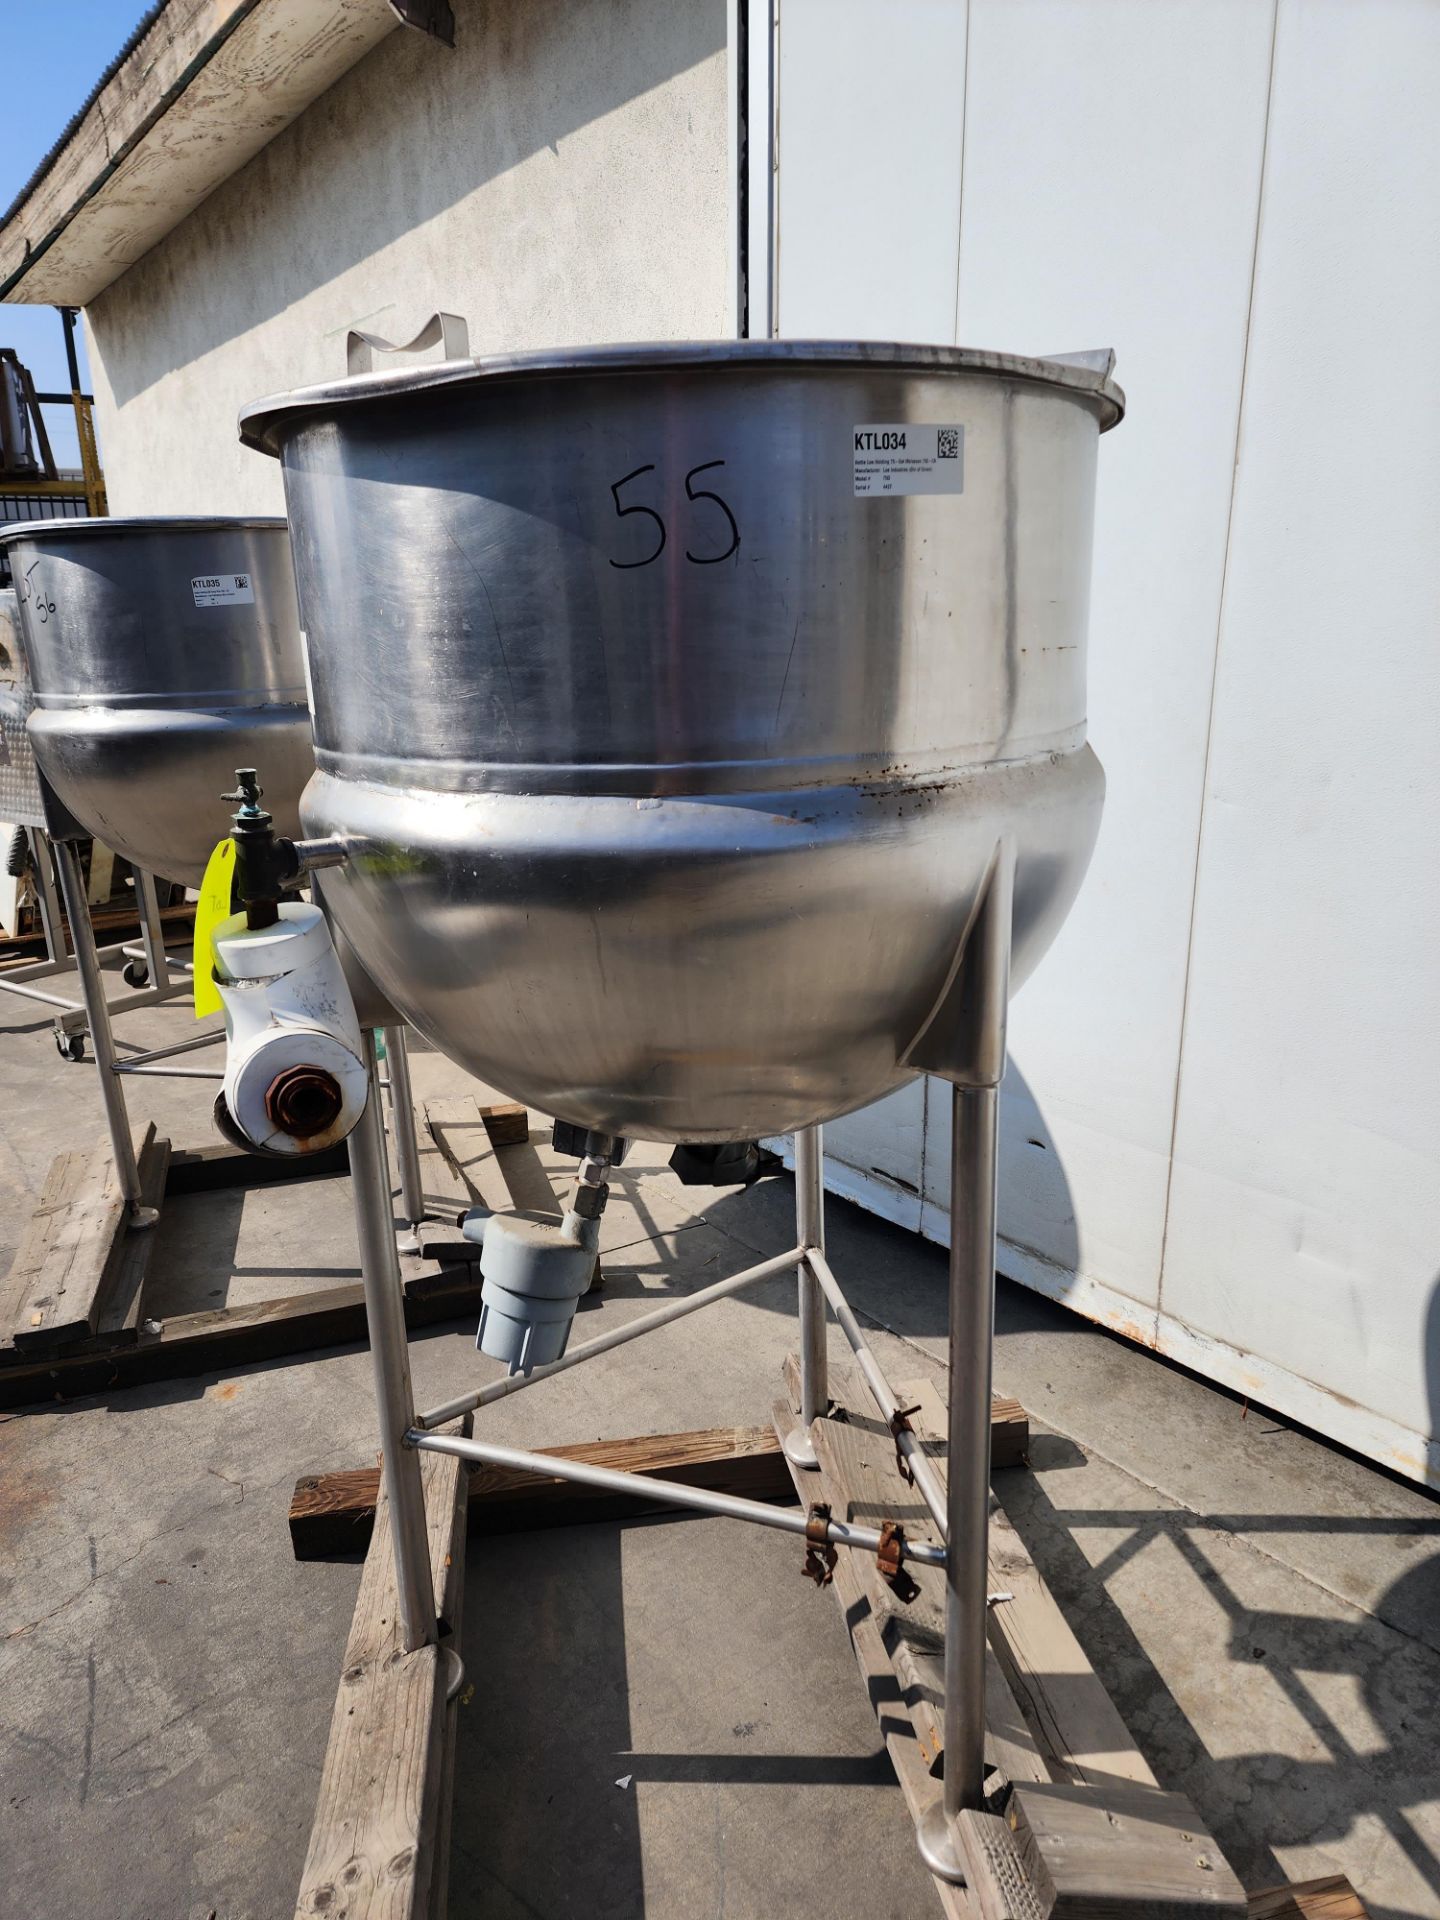 Lee Steam Fired Jacketed Kettle, Model 75D, SN 443 T, 75 Gallon Capacity. - Image 2 of 5